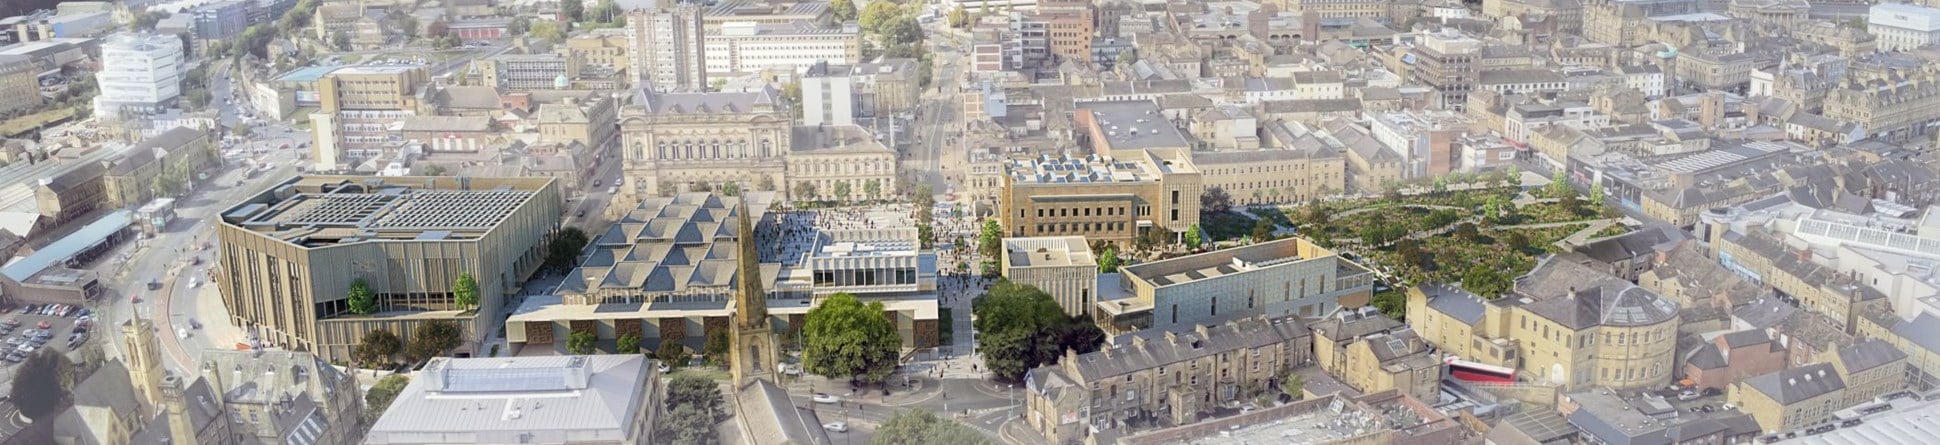 An artist's impression of new town centre development as seen from the air.